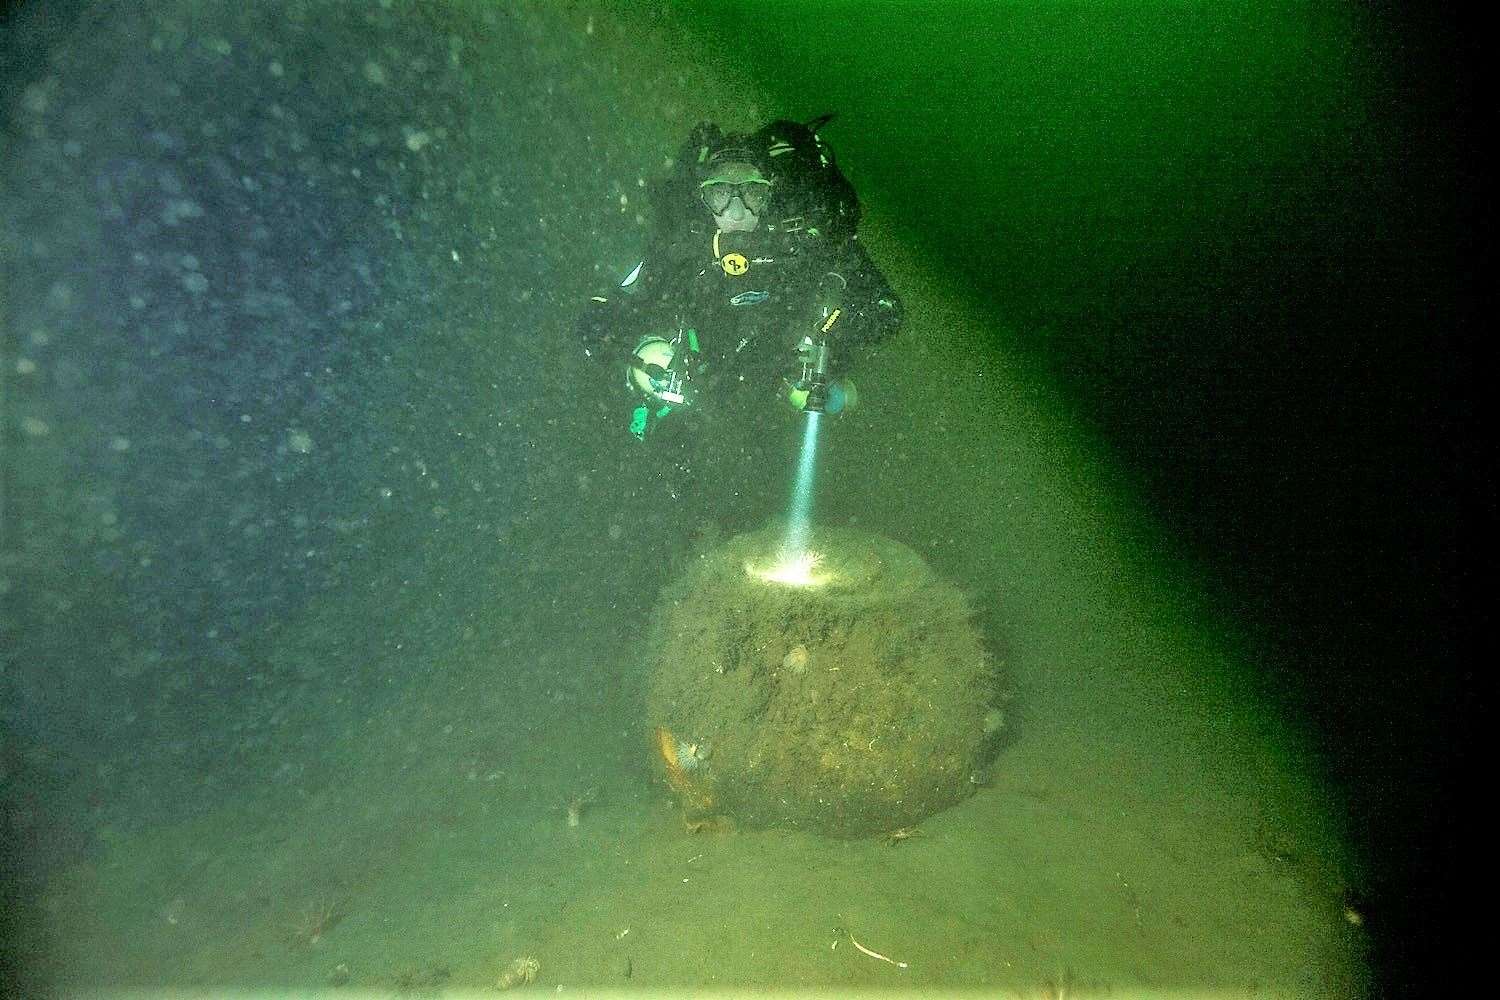 A diver locates one of the Highballs on the bottom of Loch Striven. Photo courtesy of the British Sub Aqua Club Diving Team.